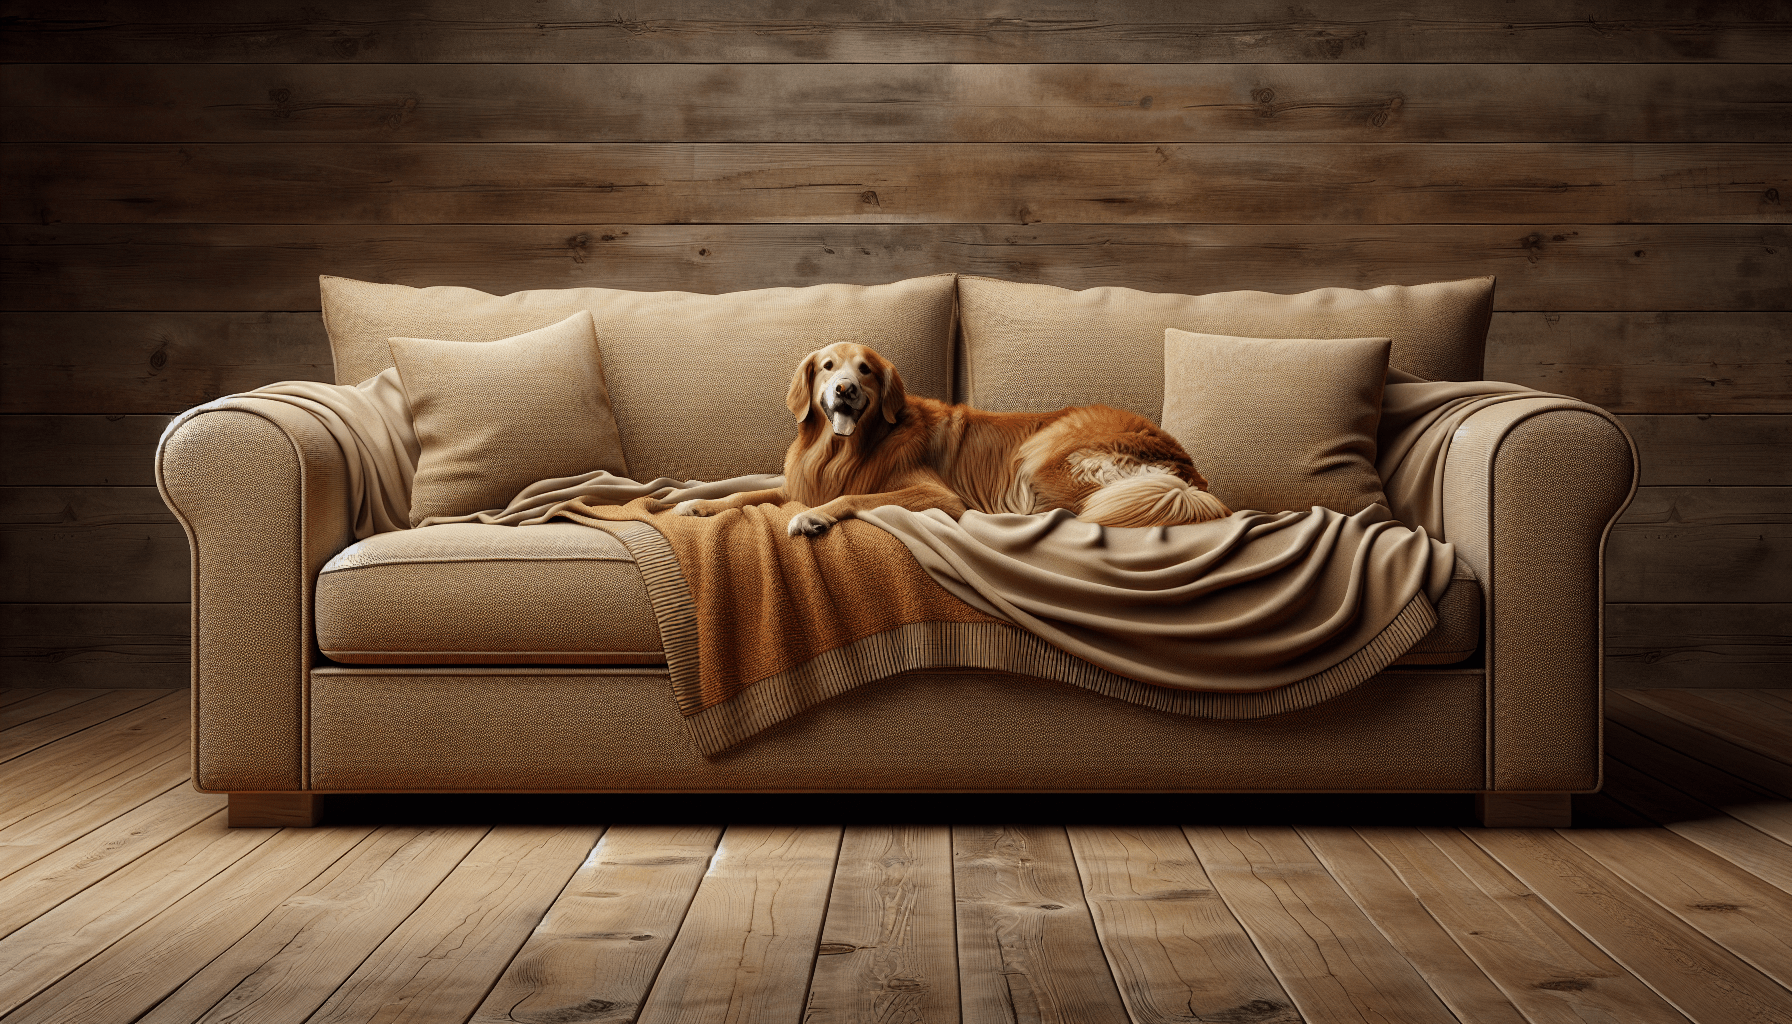 What Is The Best Sofa If You Have Dogs?